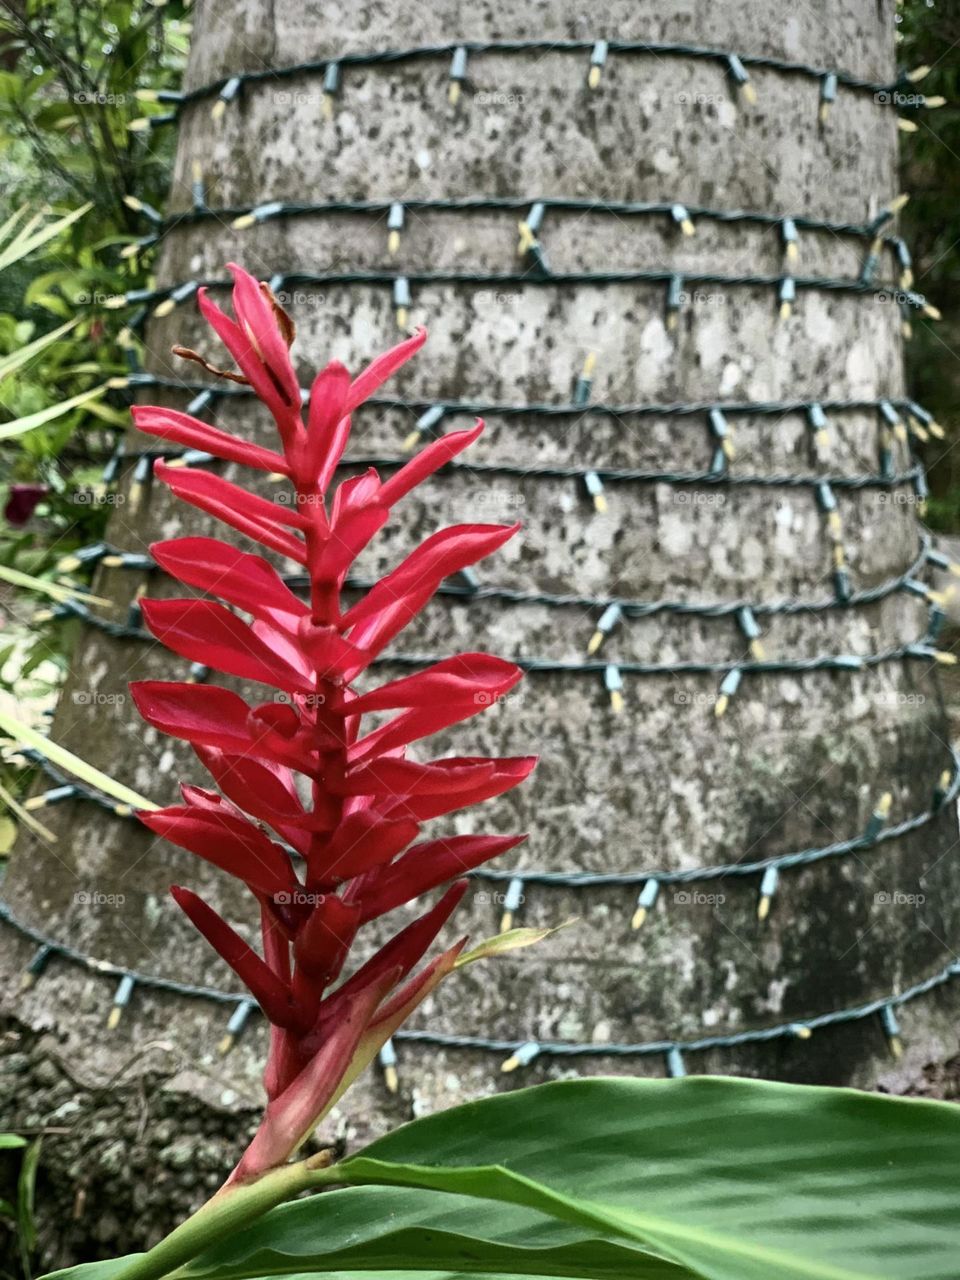 Tropical red ginger flower from Bahamas.